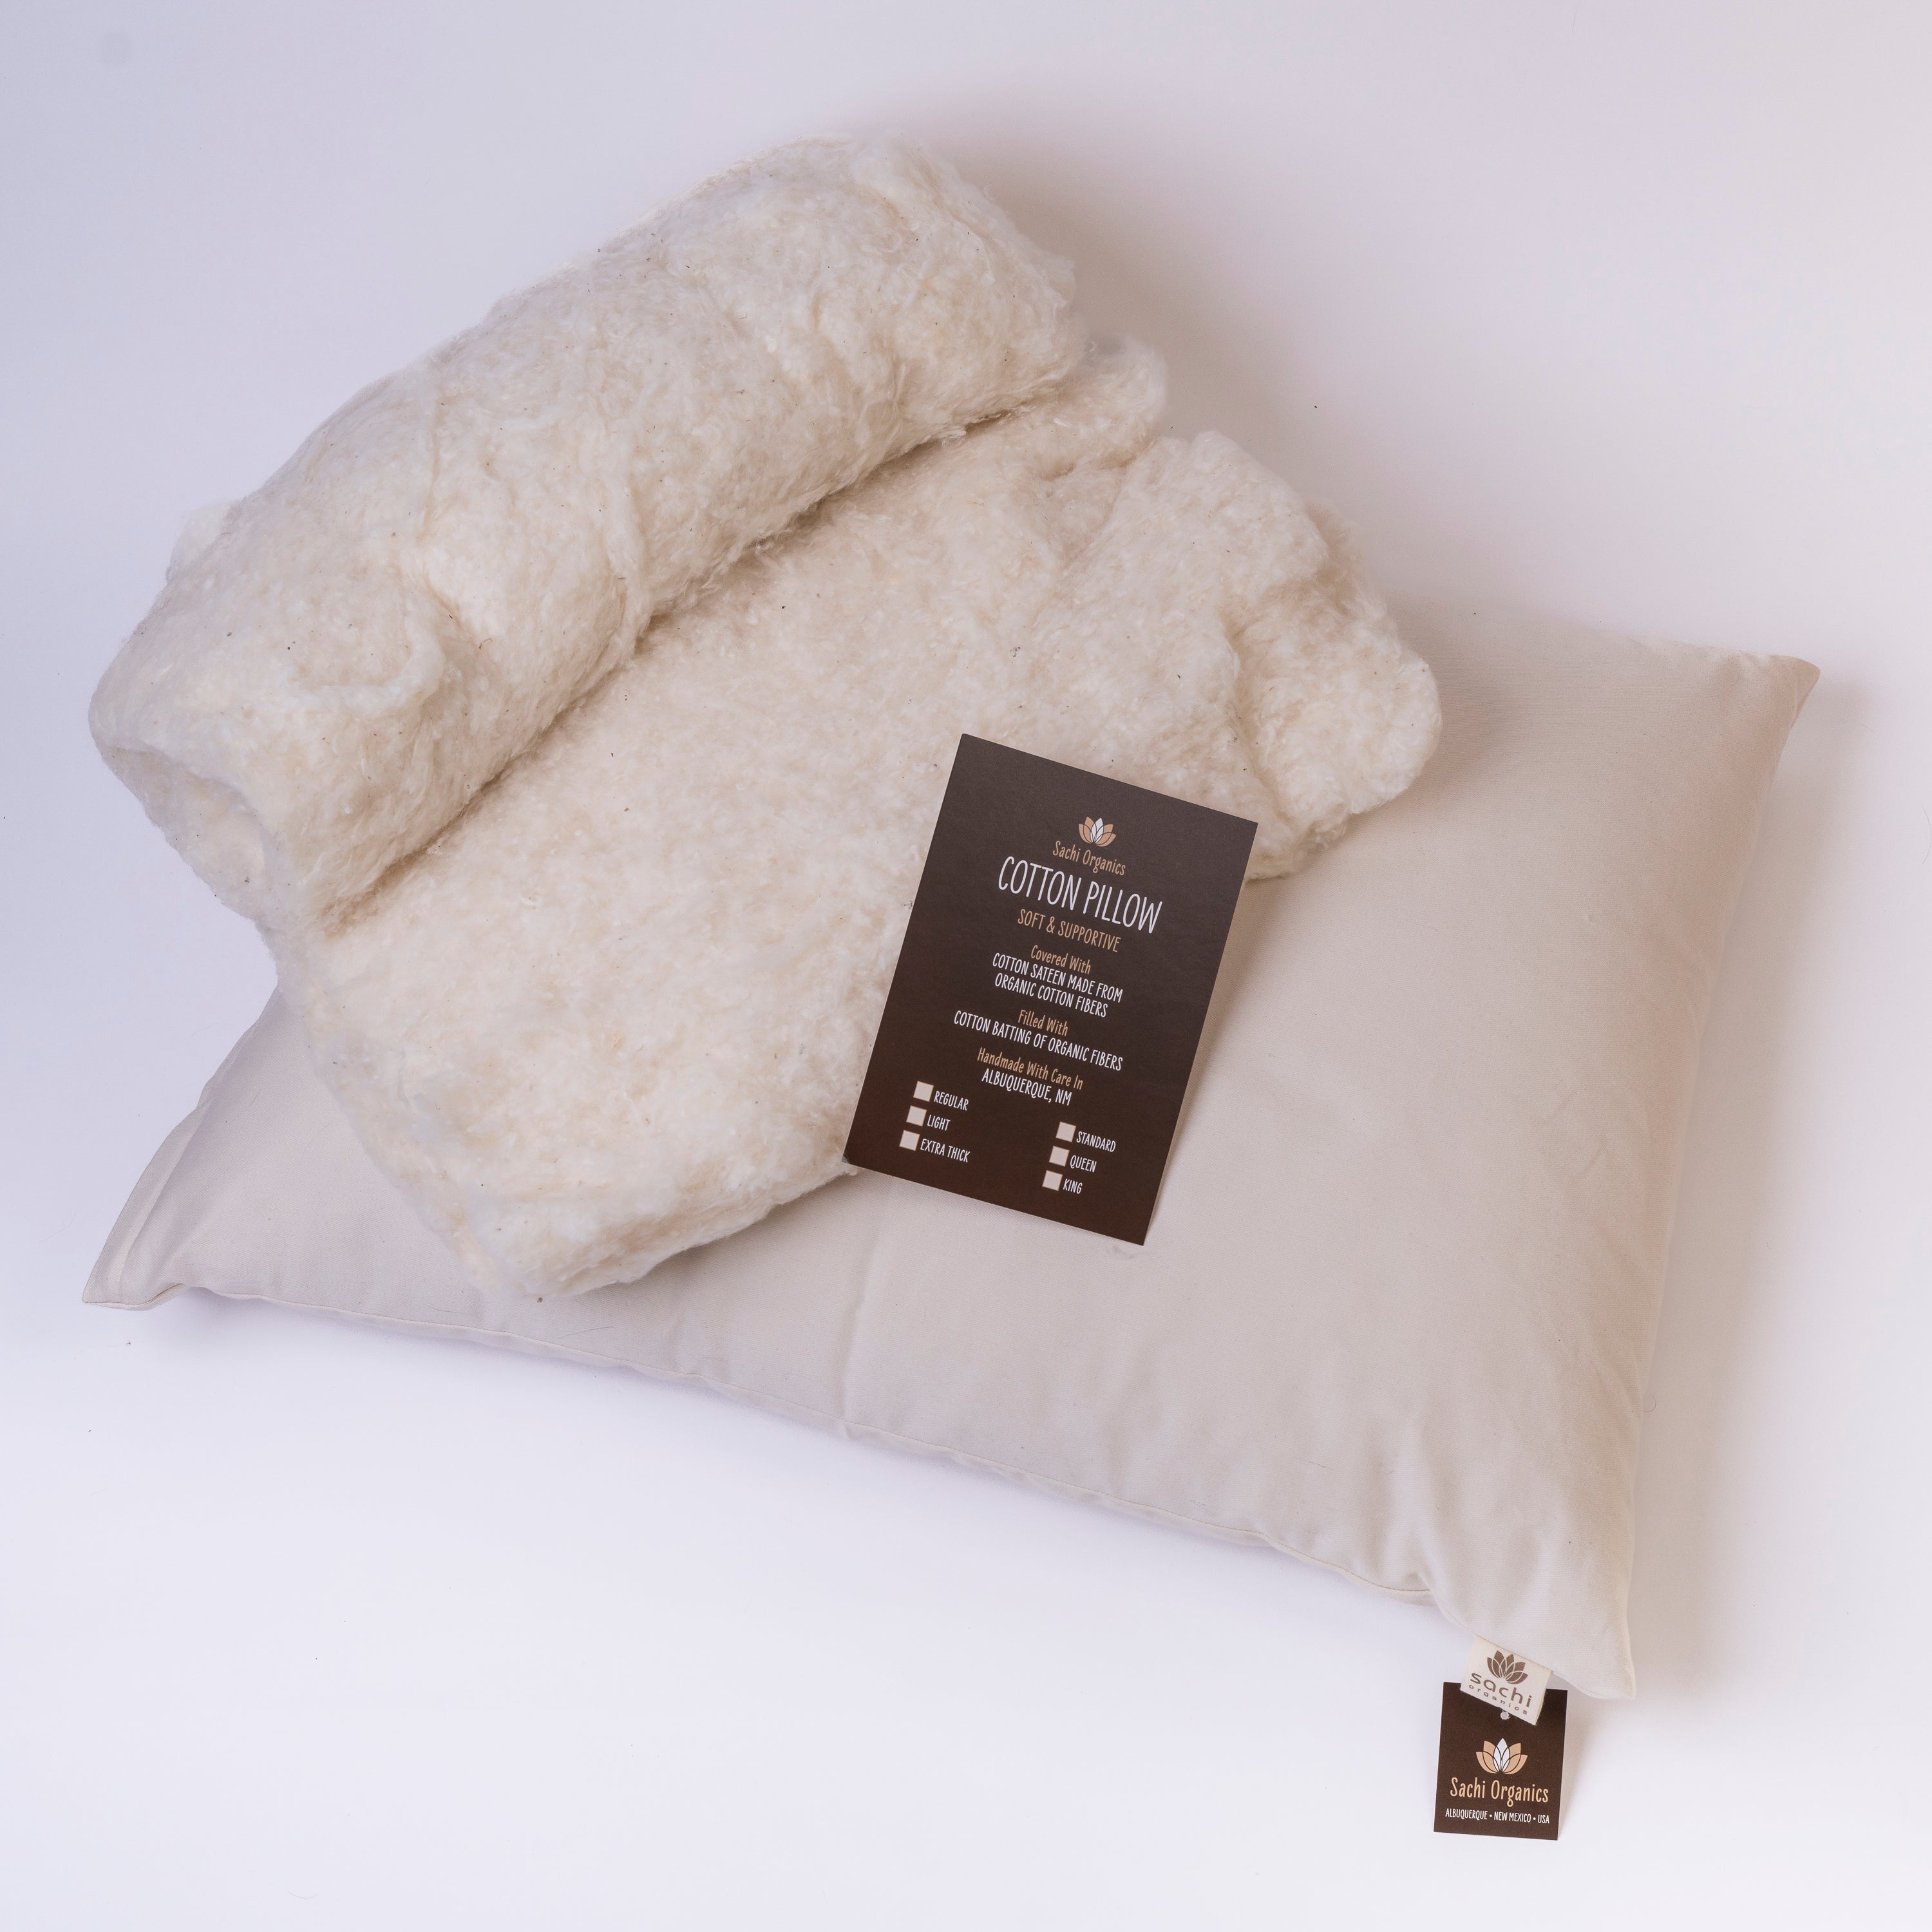 What is a Cotton Pillow? Is it Good or Bad?